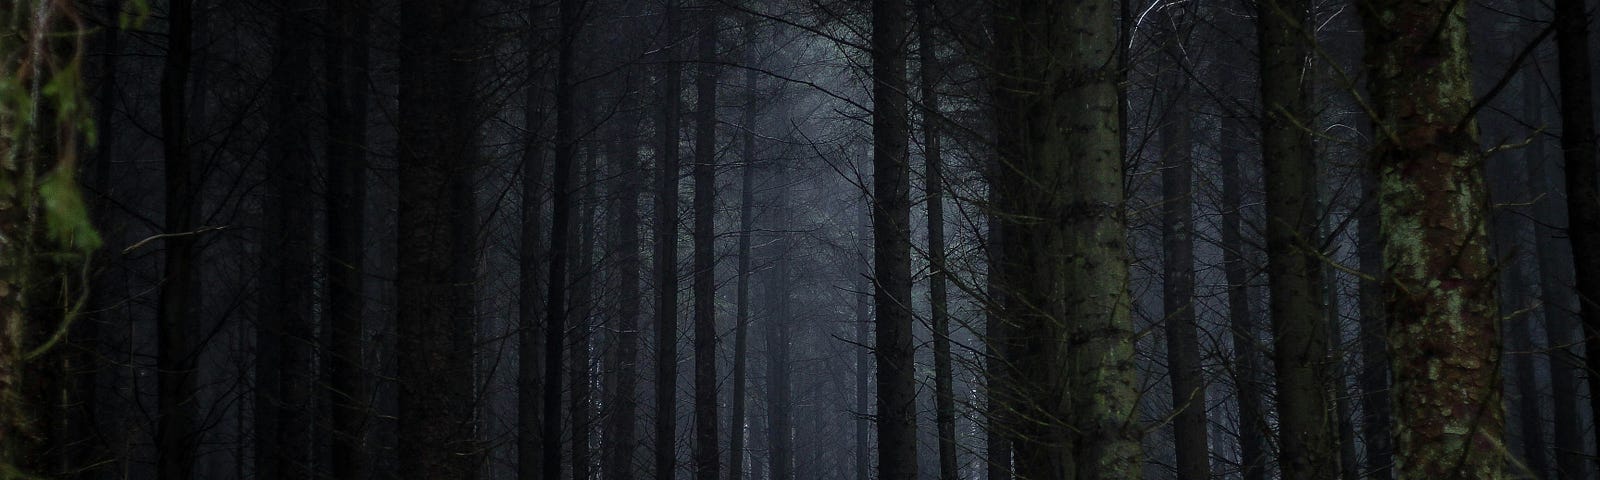 A forest at night